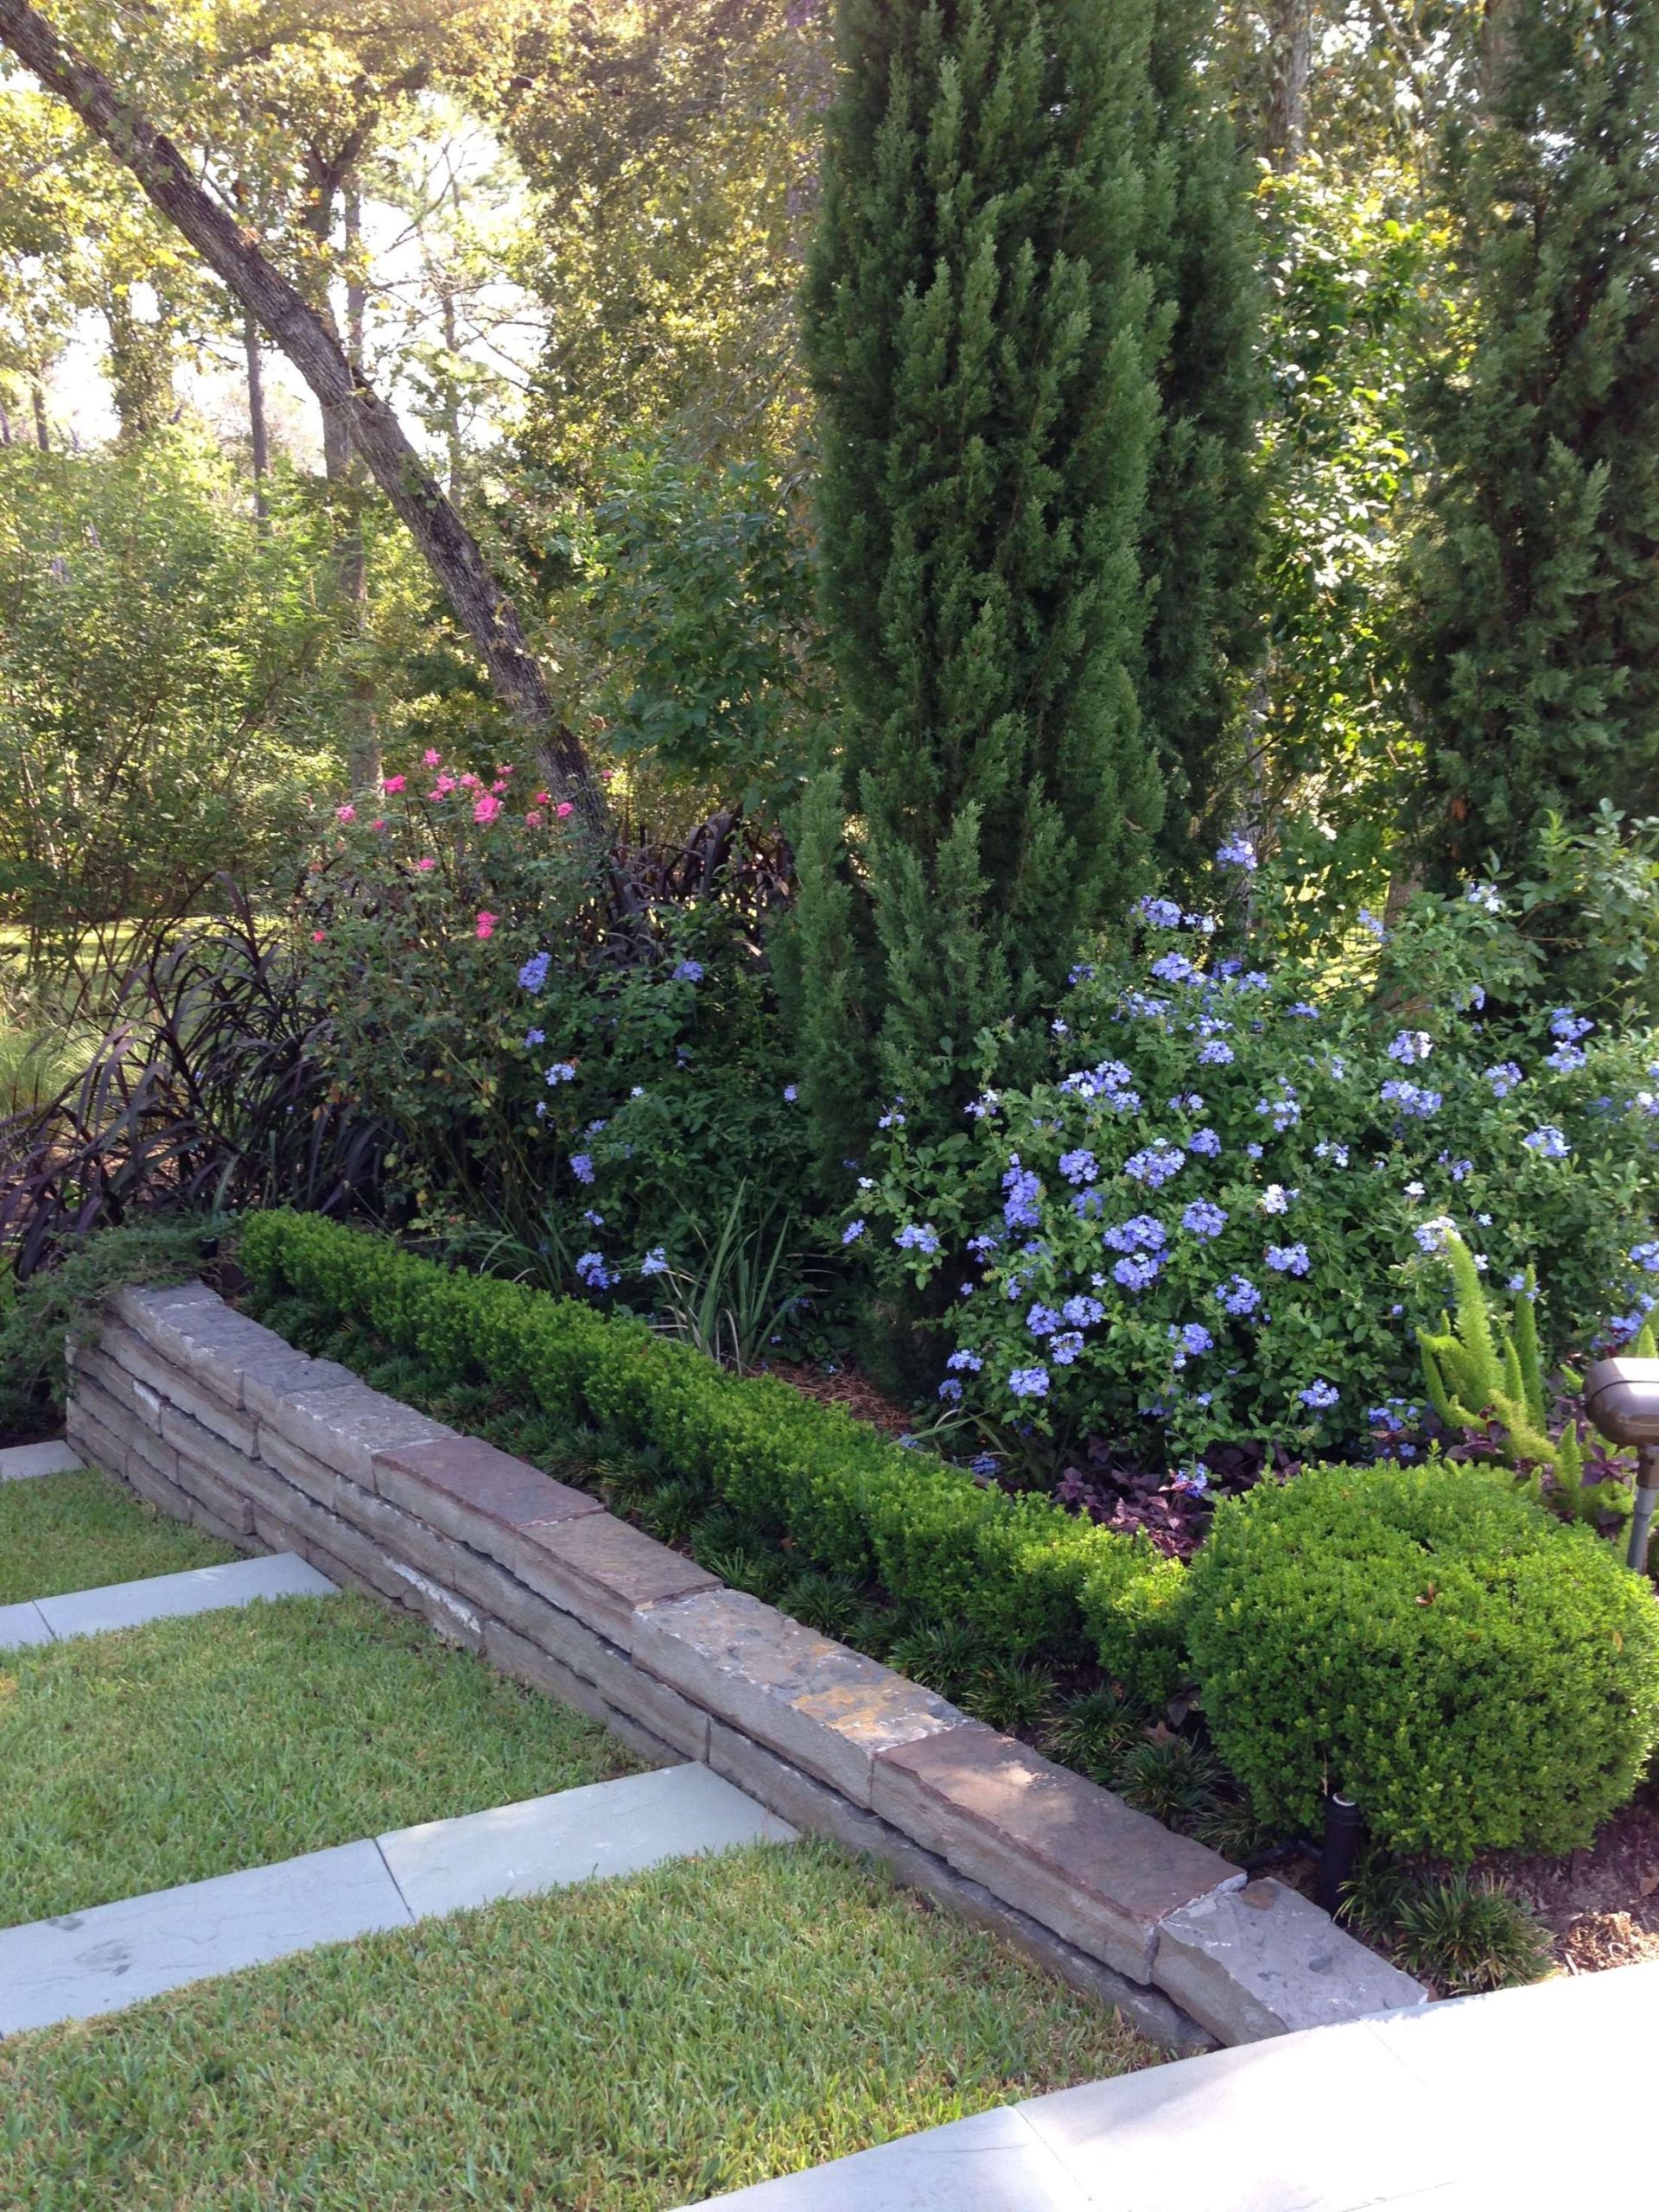 Boxwood, Italian Cypress, Plumbago and Grasses make up some of the